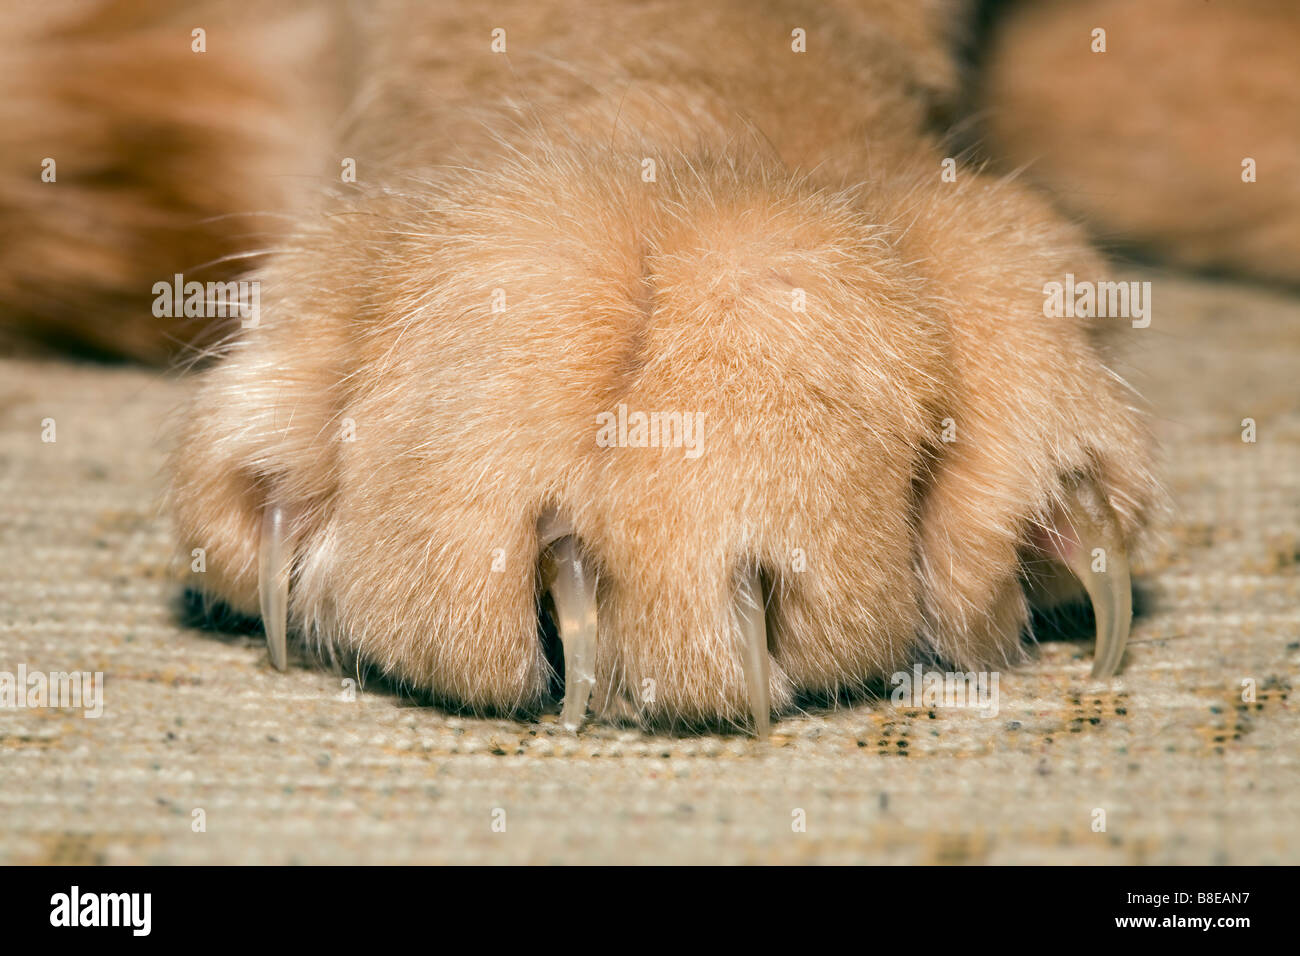 Cats paw and claws Stock Photo